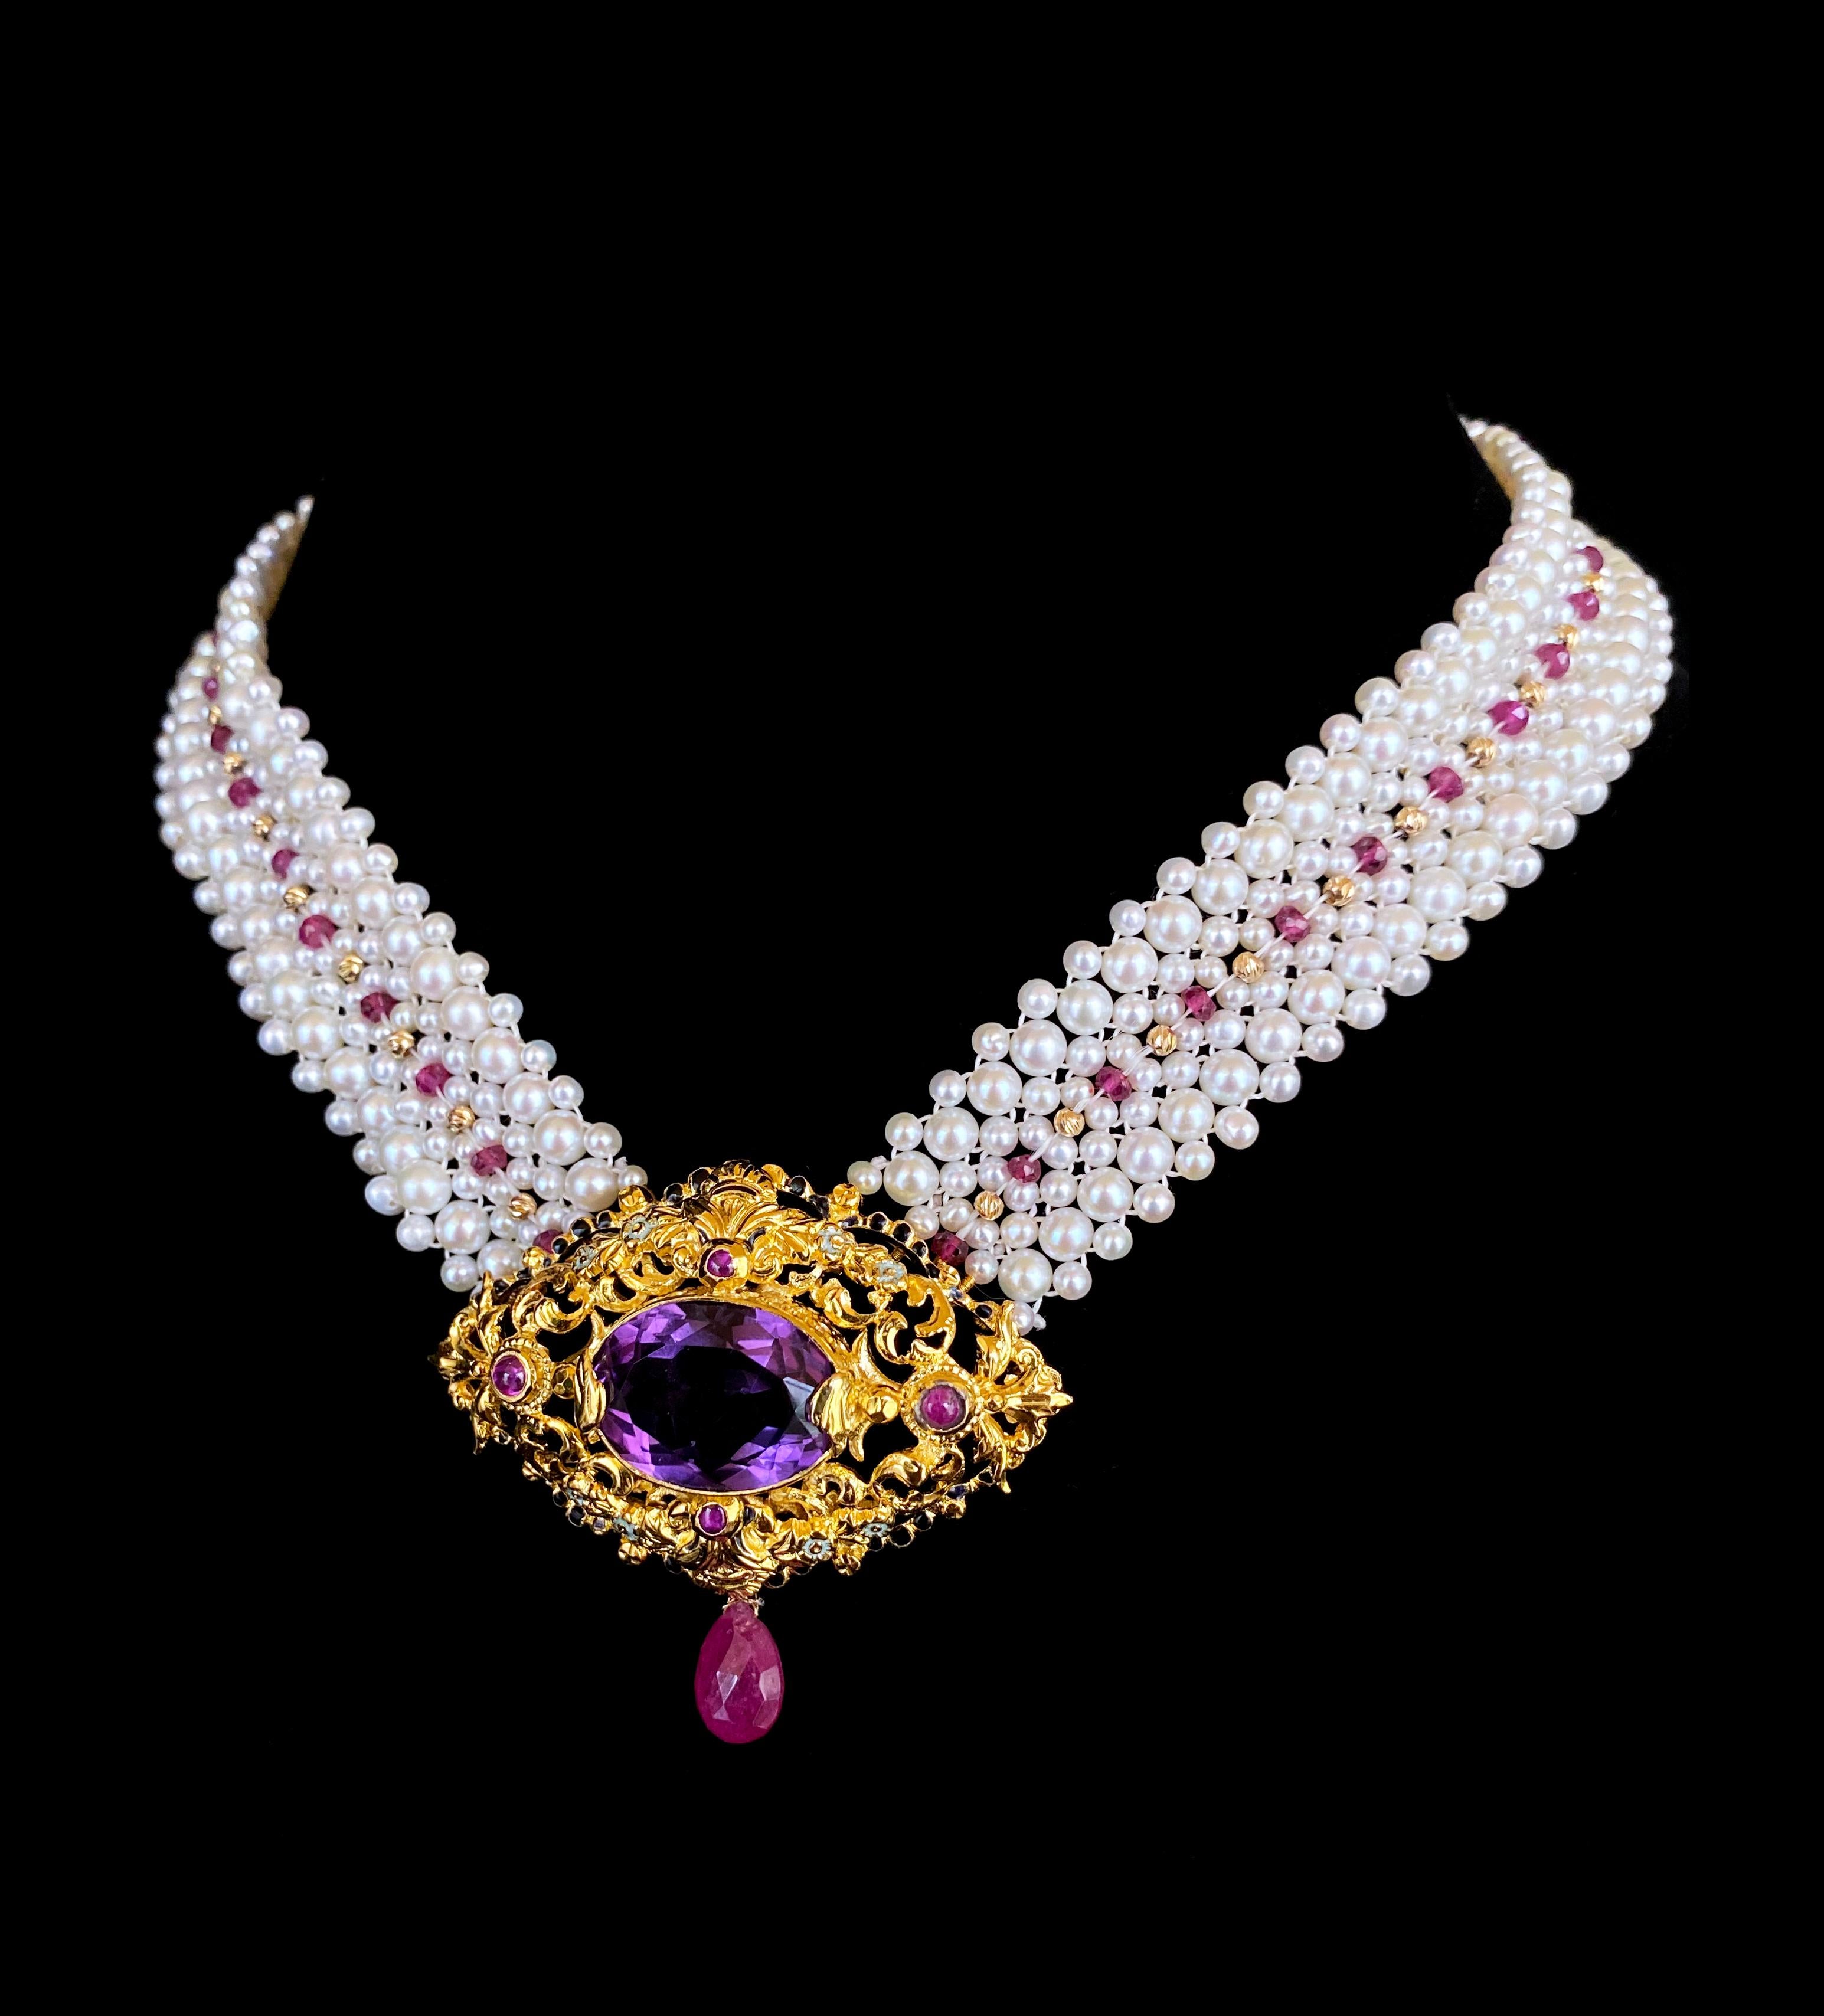 Marina J. Woven Pearl, Ruby & Gold Necklace with Vintage Gold & Amethyst Brooch 1